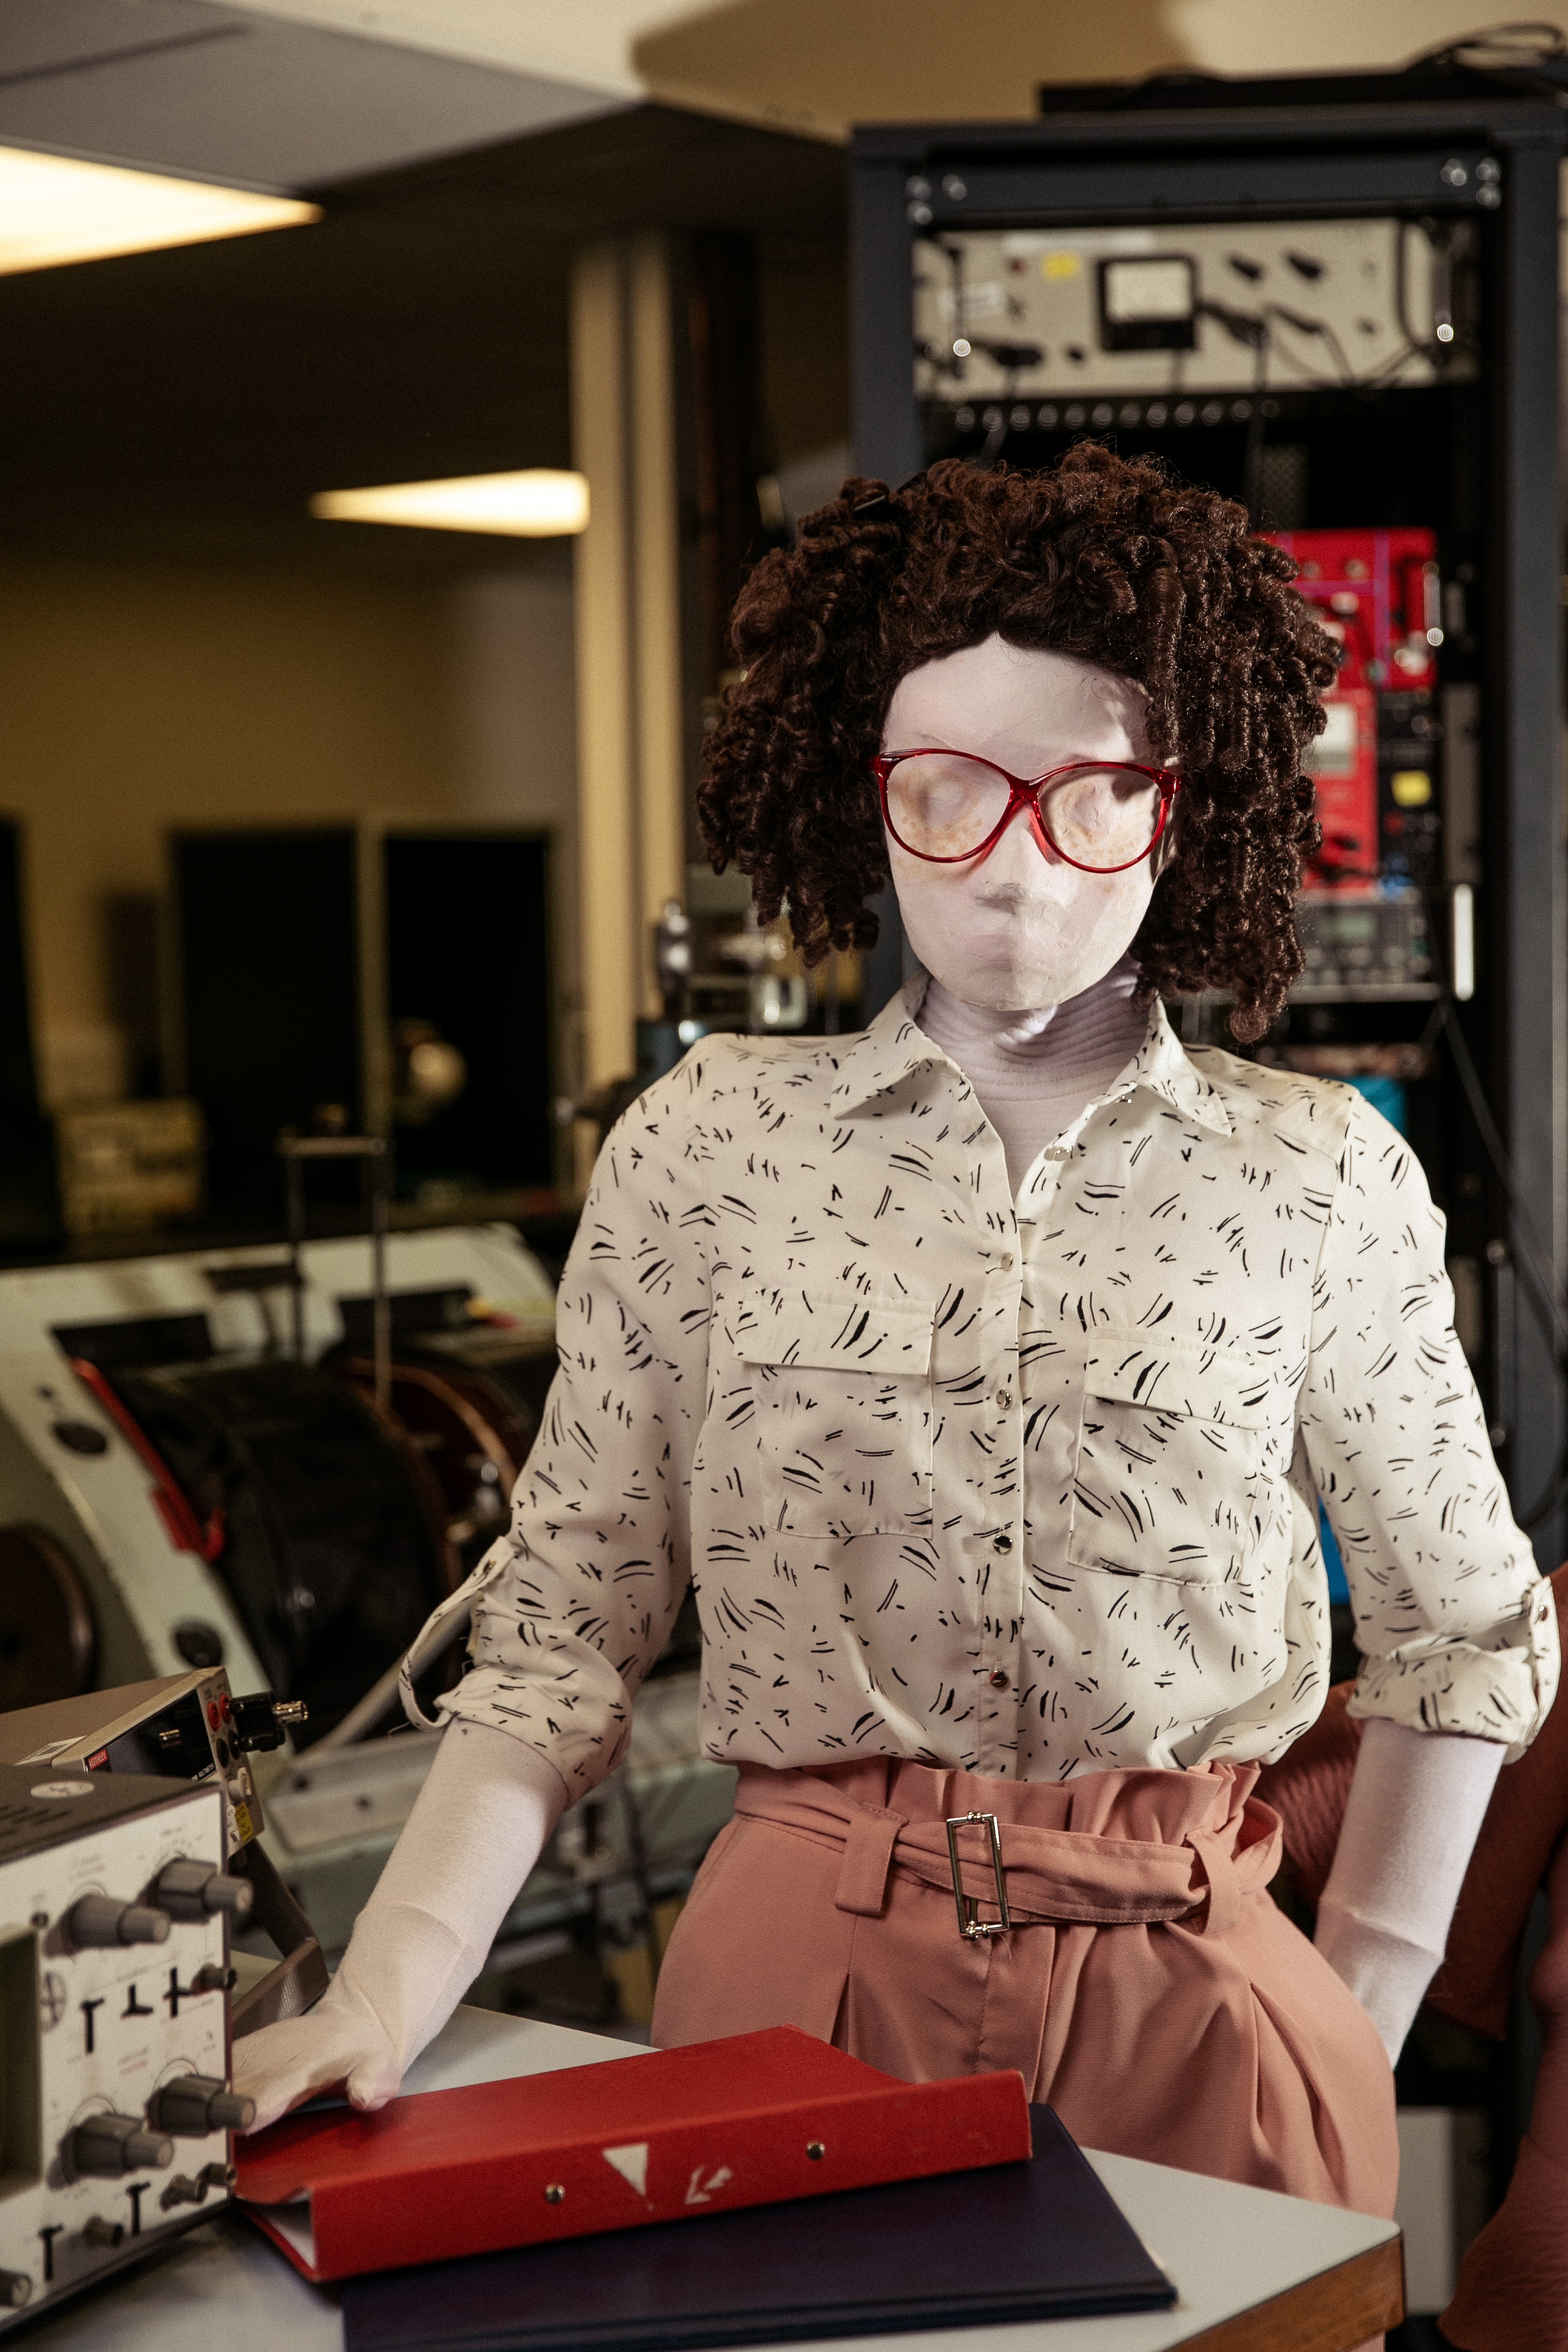 Kate, a female human sized puppet with big, red, 80s glasses and a tight perm, stands behind behind a desk with one hand resting on her red folder, and one hand in her pocket. There is an oscilloscope partially in view on the desk, with lots of physics equipment in the background.